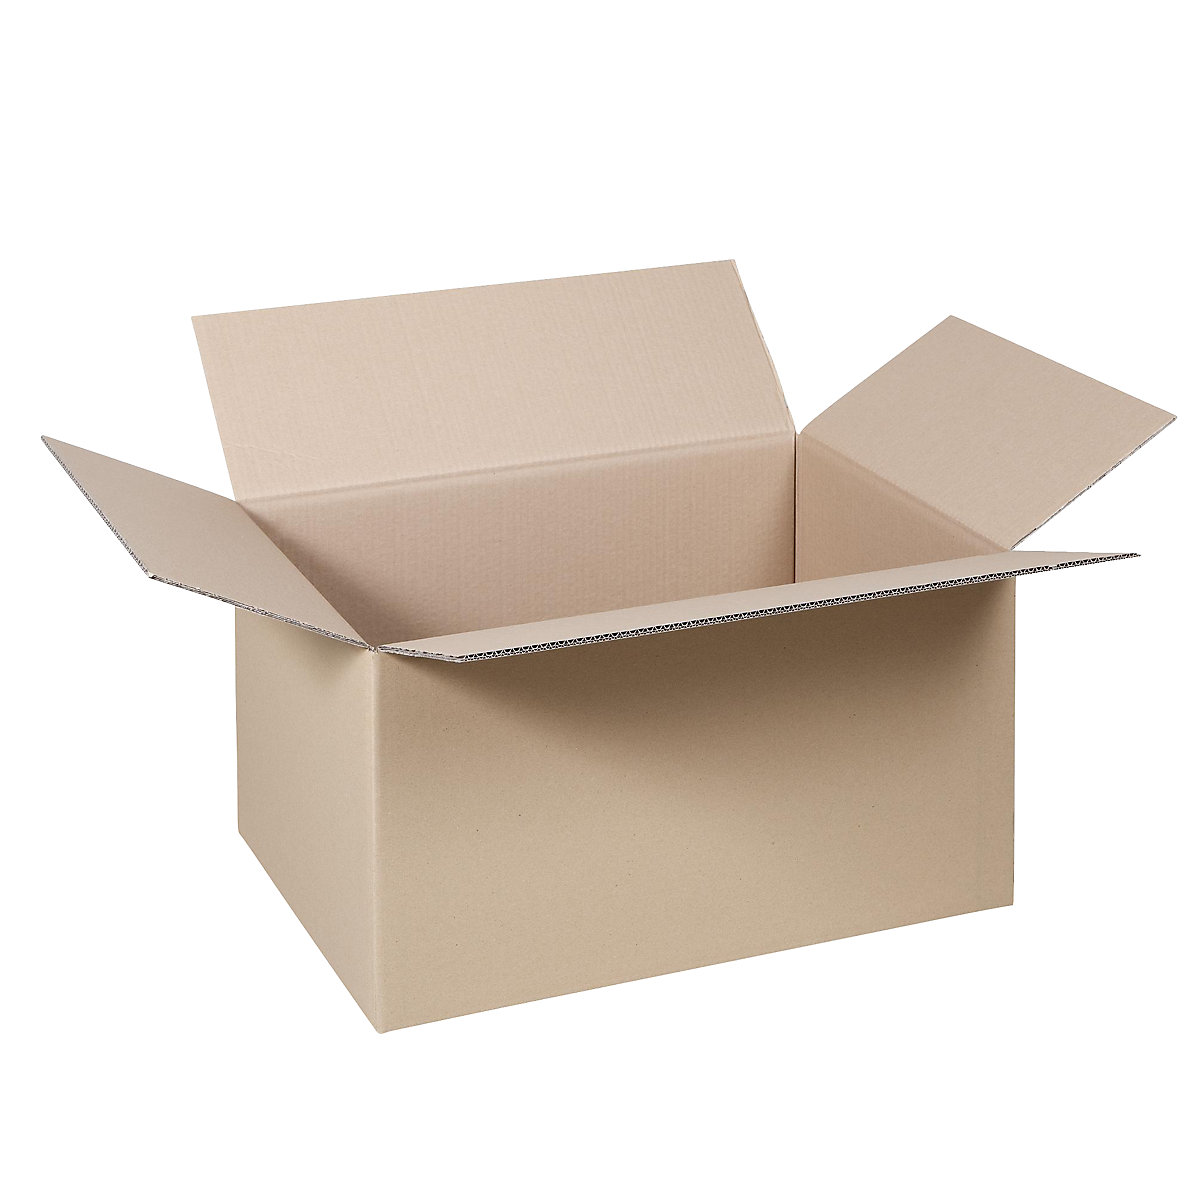 Folding cardboard box, FEFCO 0201, made of double fluted cardboard, internal dimensions 300 x 200 x 170 mm, pack of 100-3